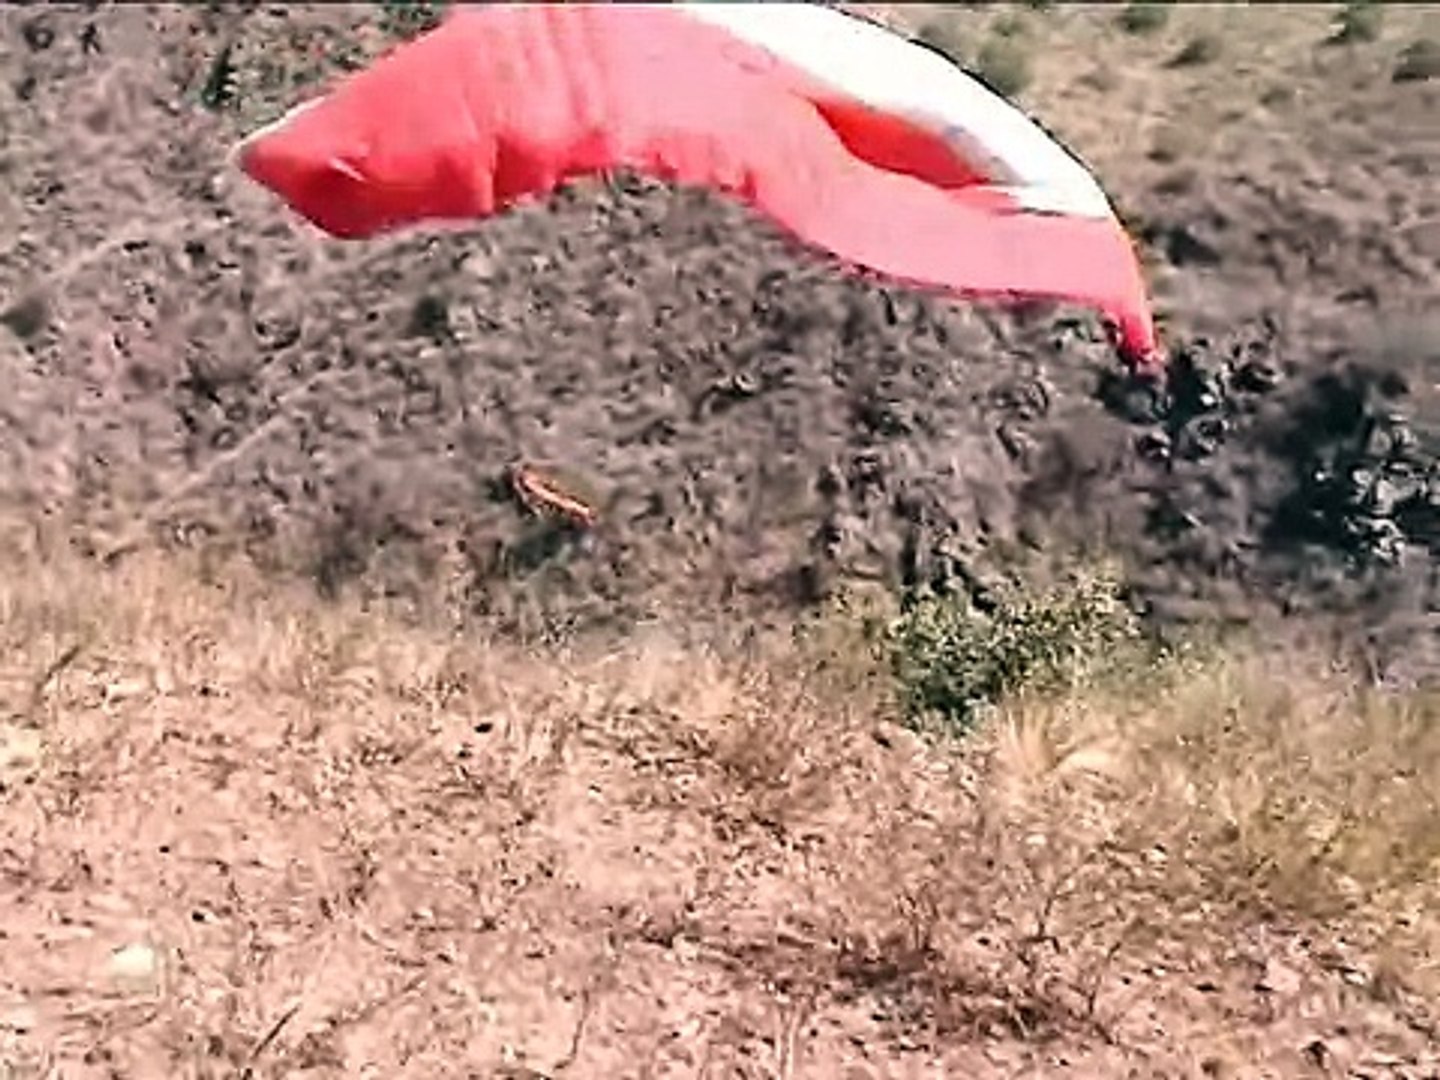 Paragliding accident